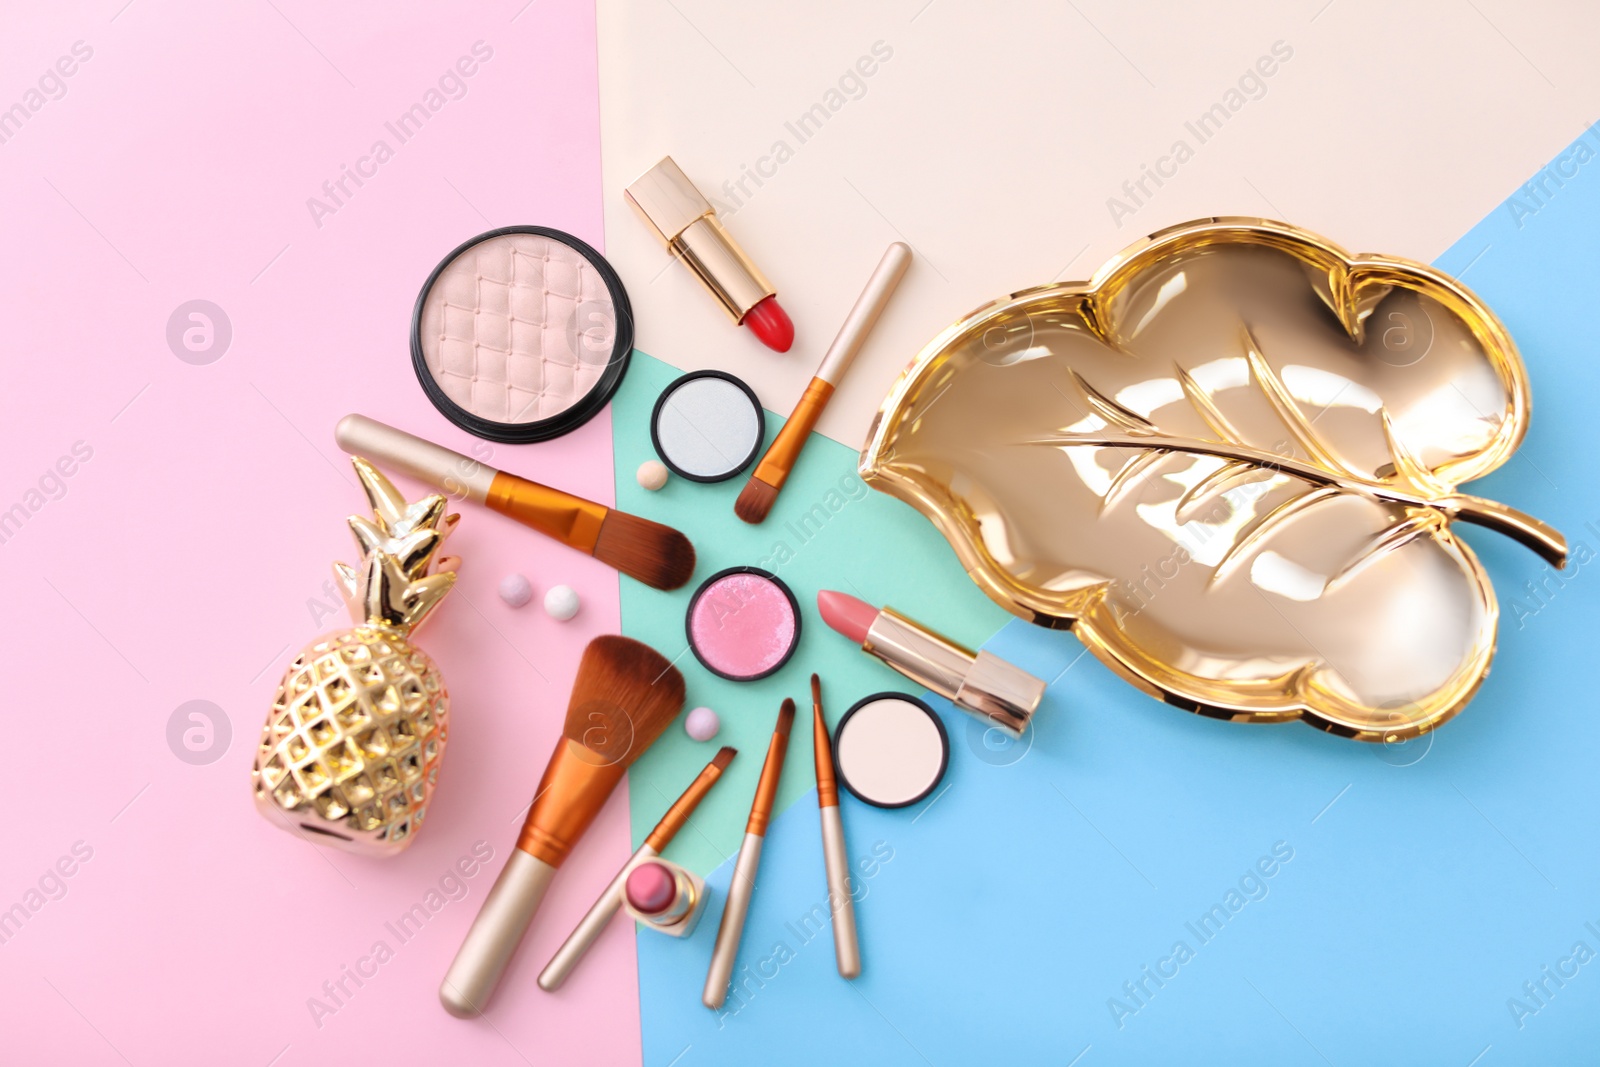 Photo of Makeup products and brushes on color background